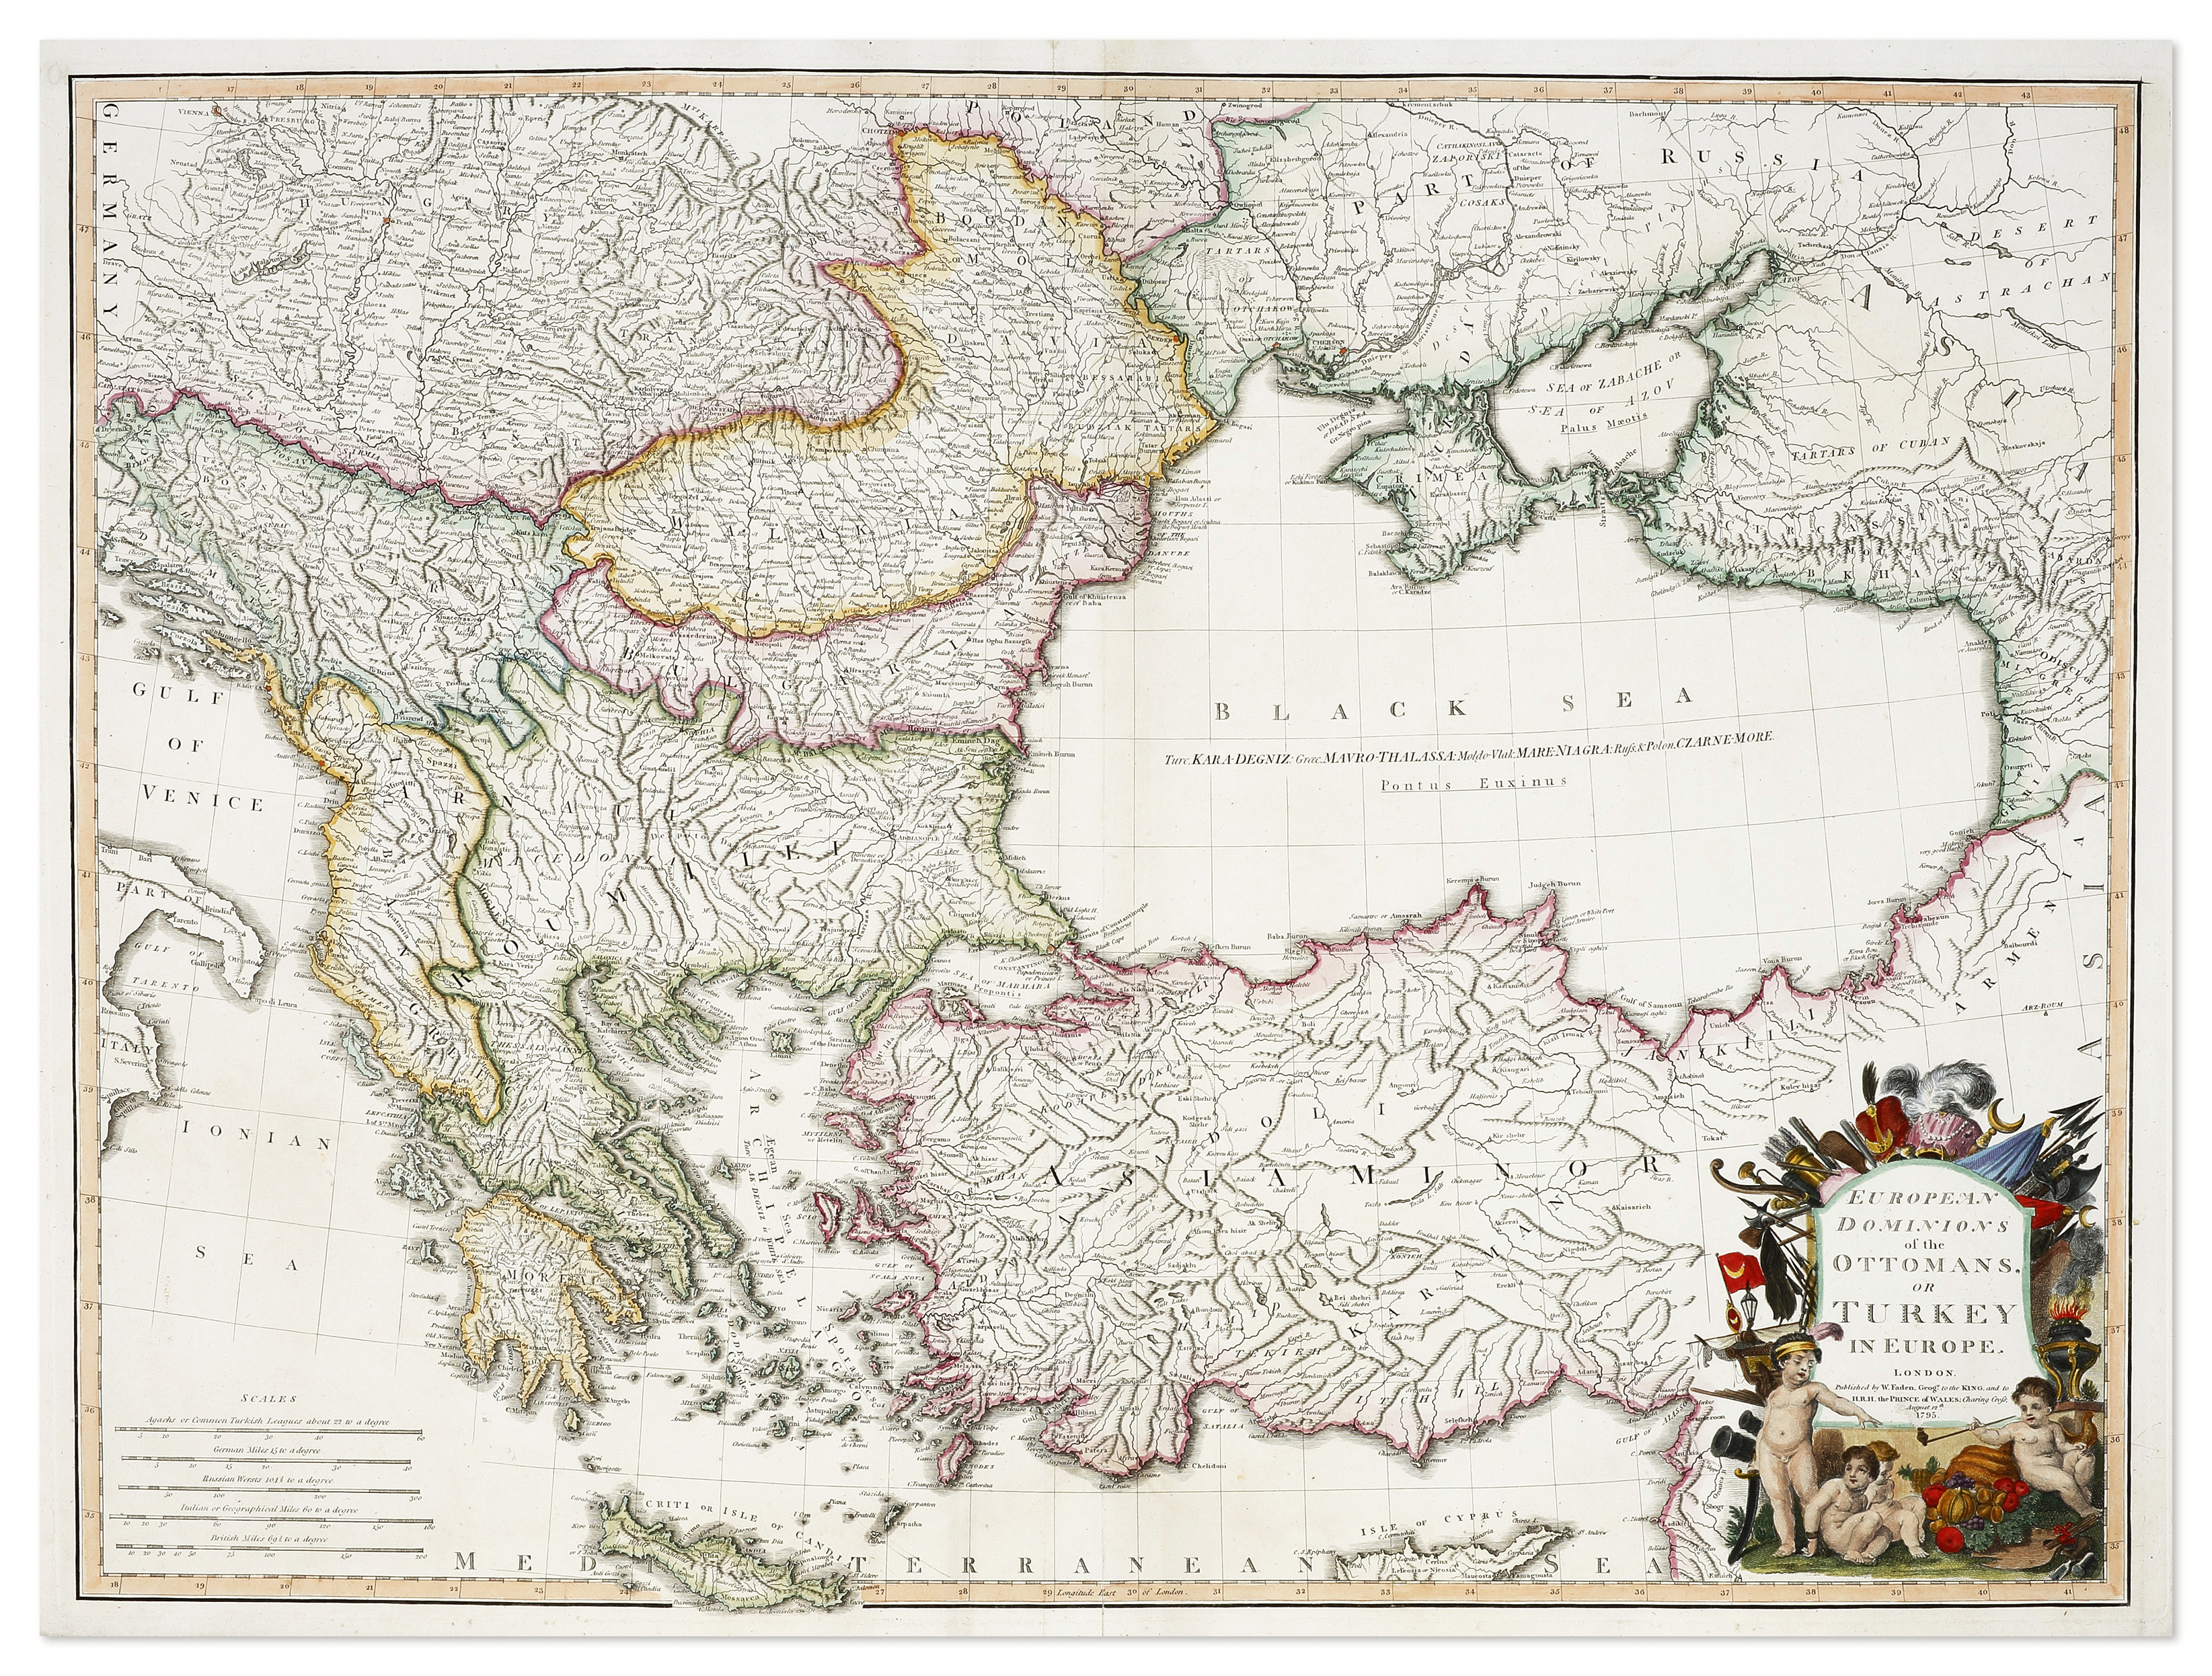 European Dominions of the Ottomans or Turkey in Europe. - Antique Map from 1795